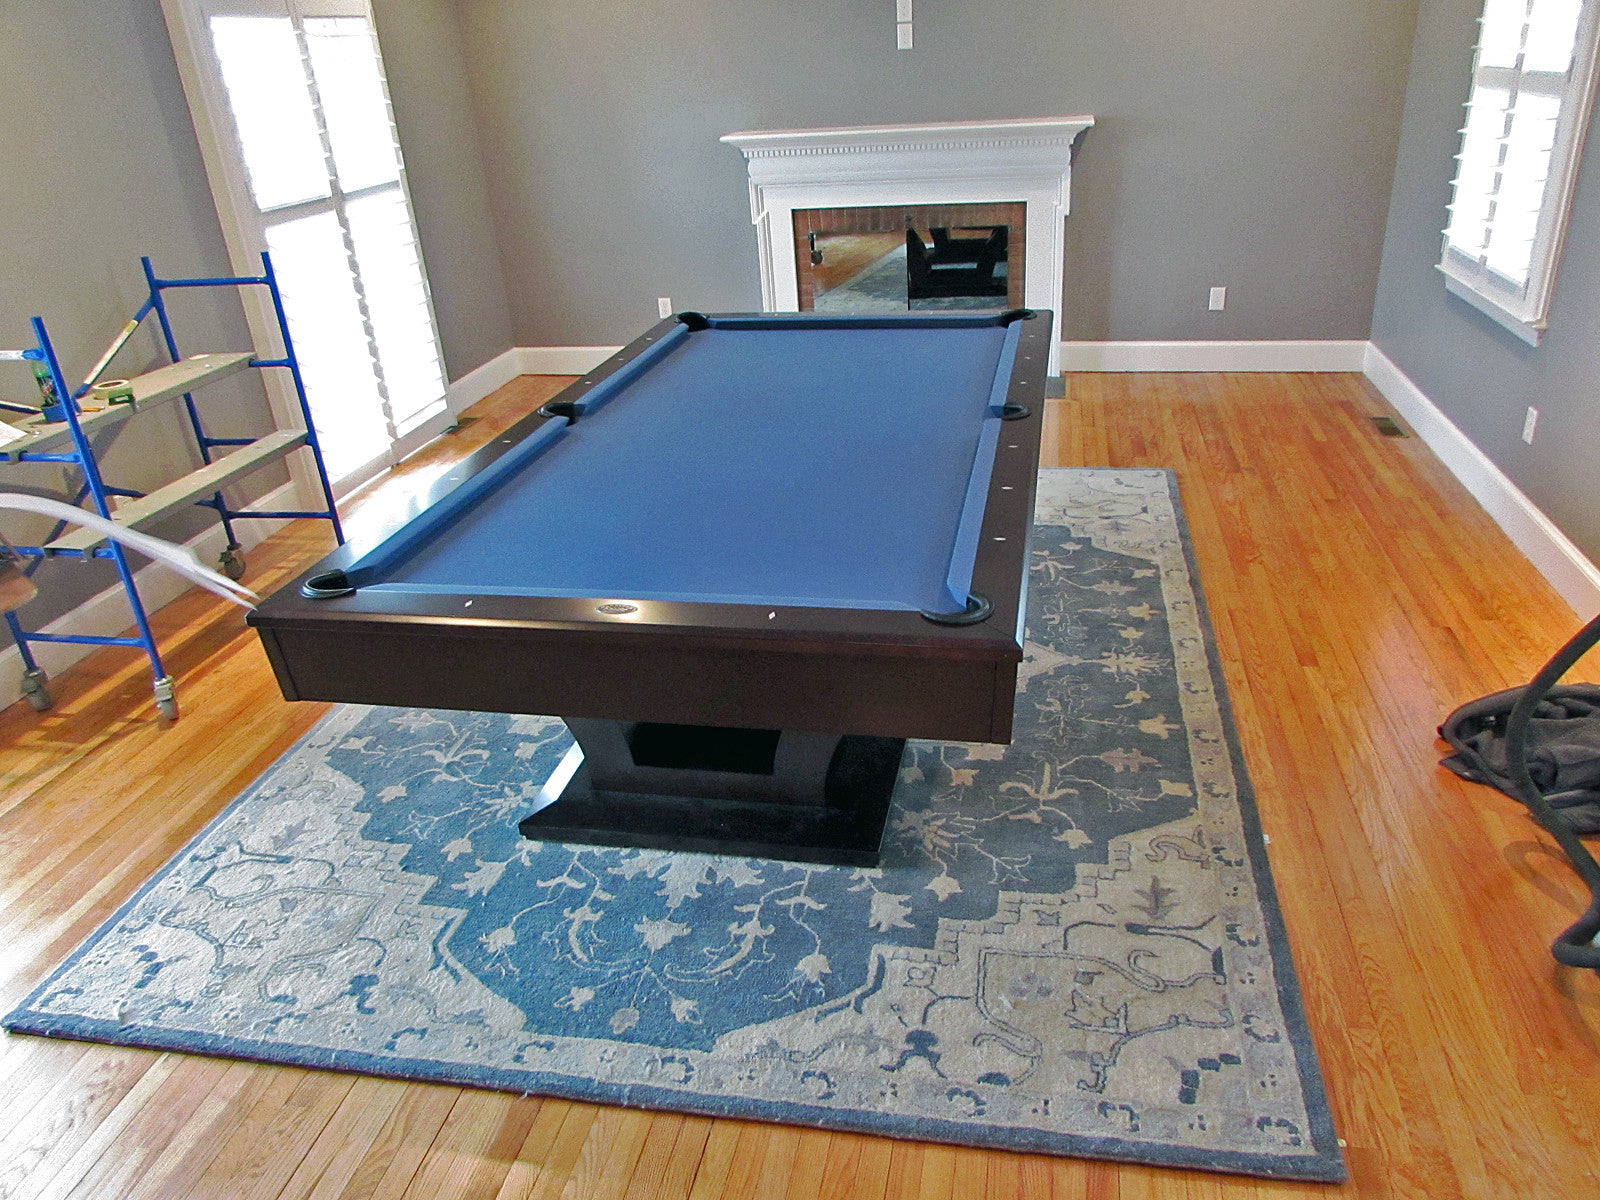 Olhausen Alexandria Pool Table installed in Marriotsville Maryland